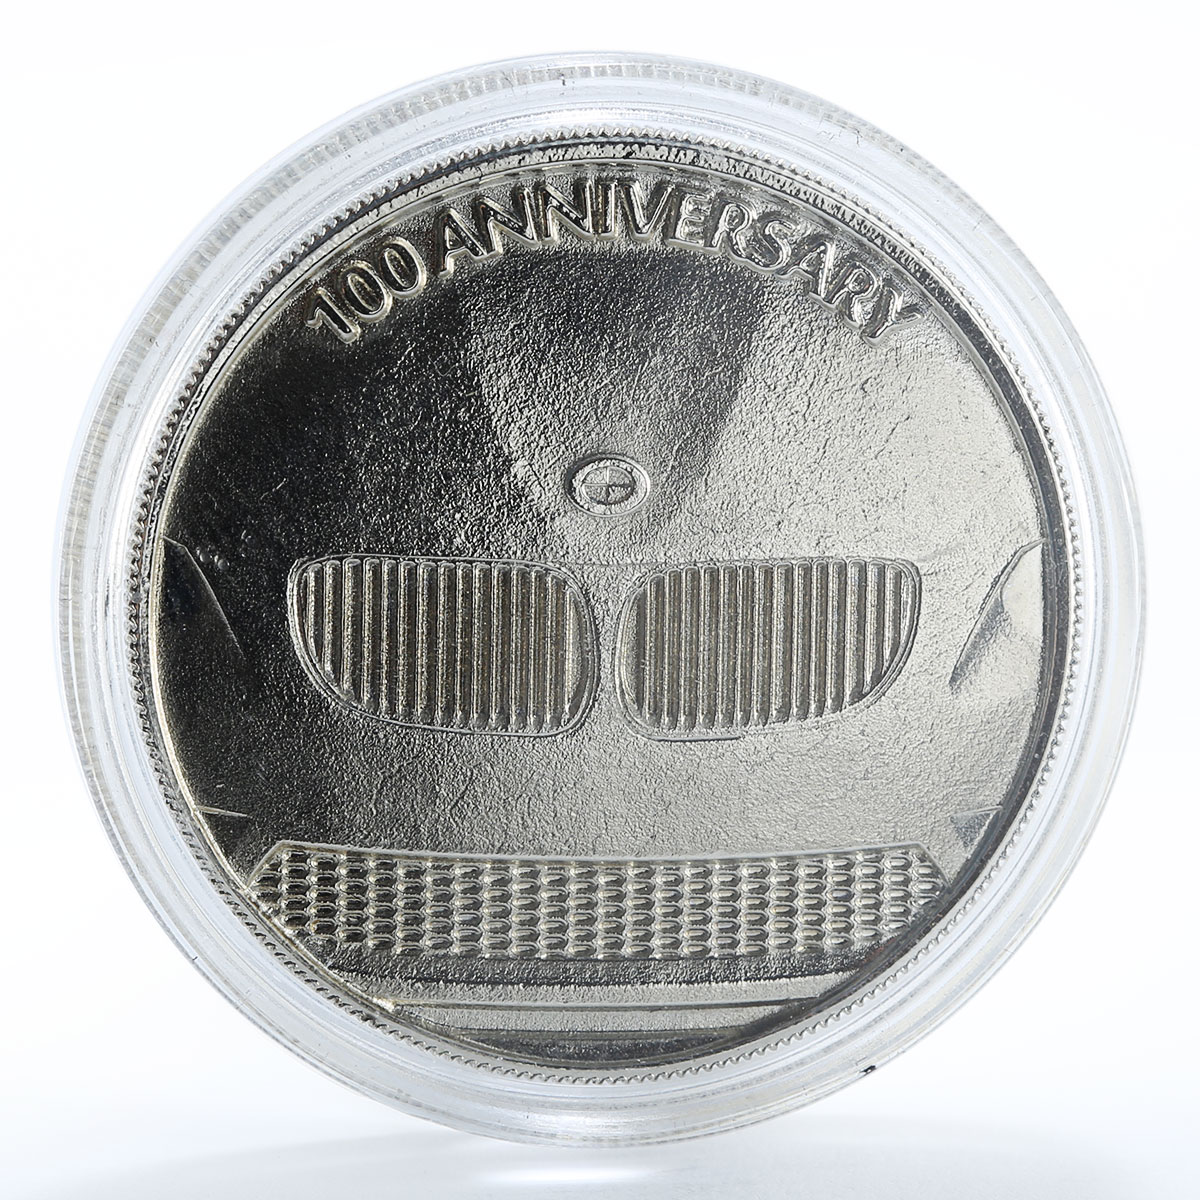 100th anniversary of the founding companies BMW, Karl Rapp, token coin